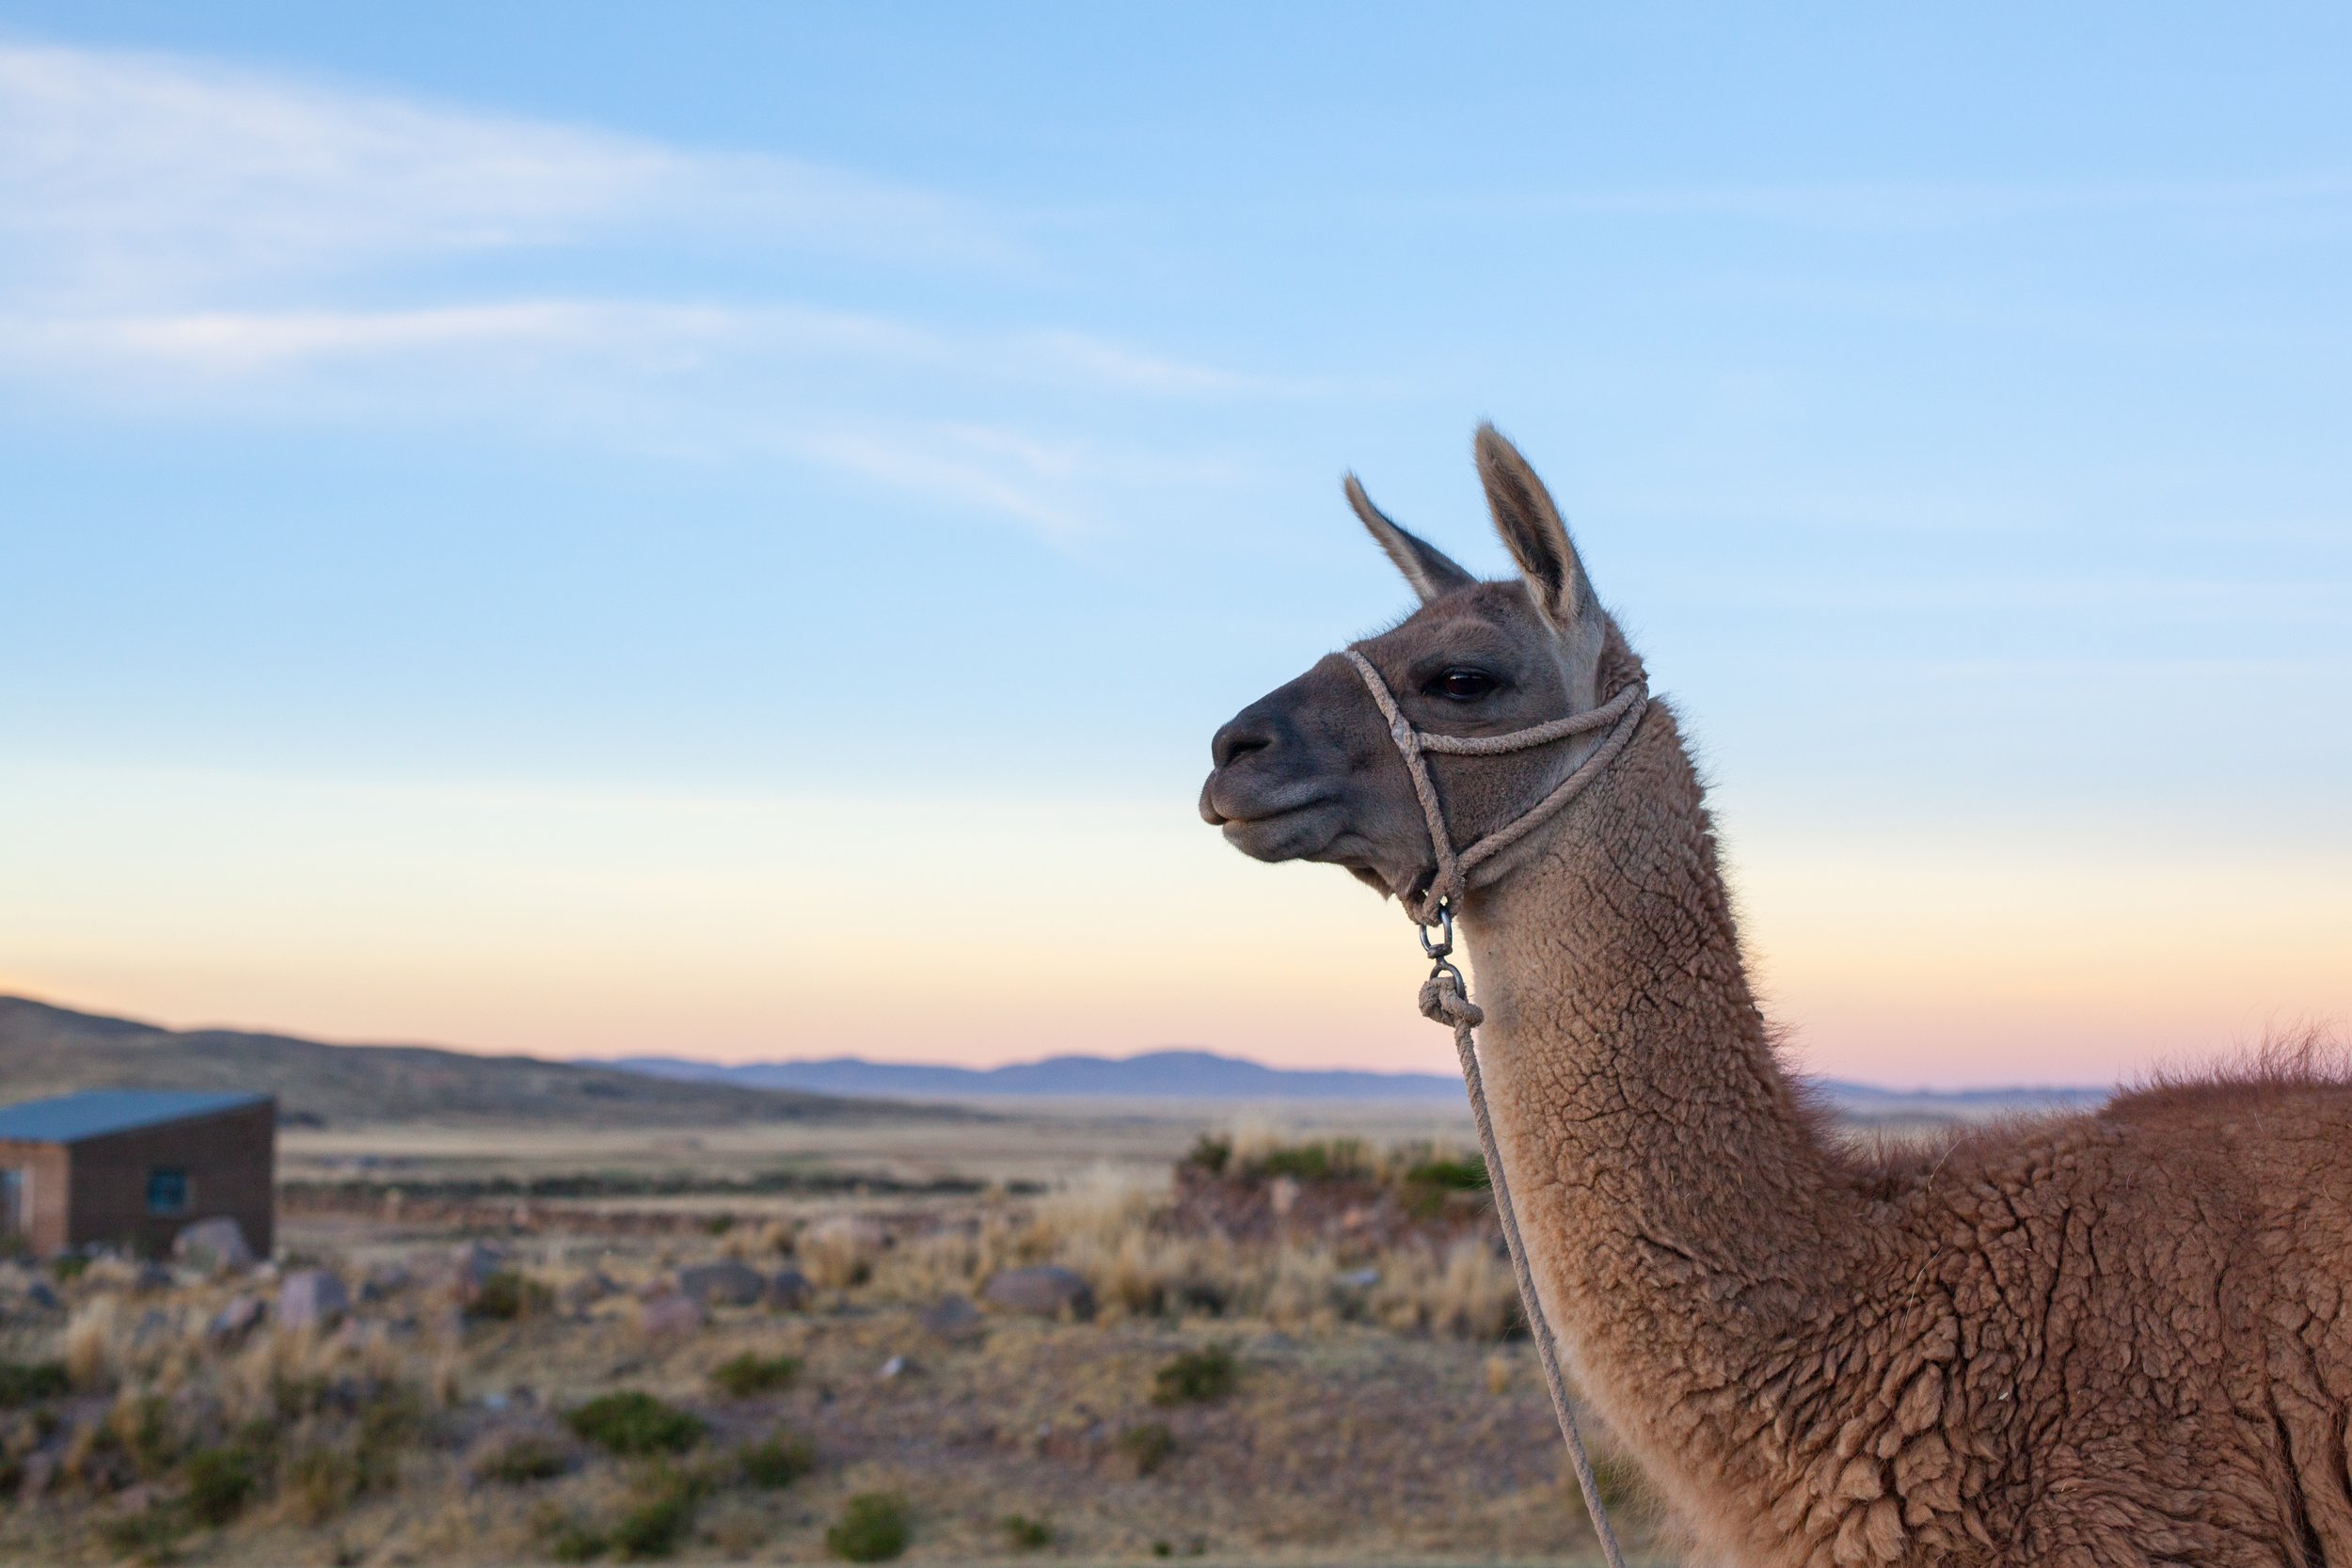 Everyone loves a Llama!  Travel photography blogging by Geraint Rowland.